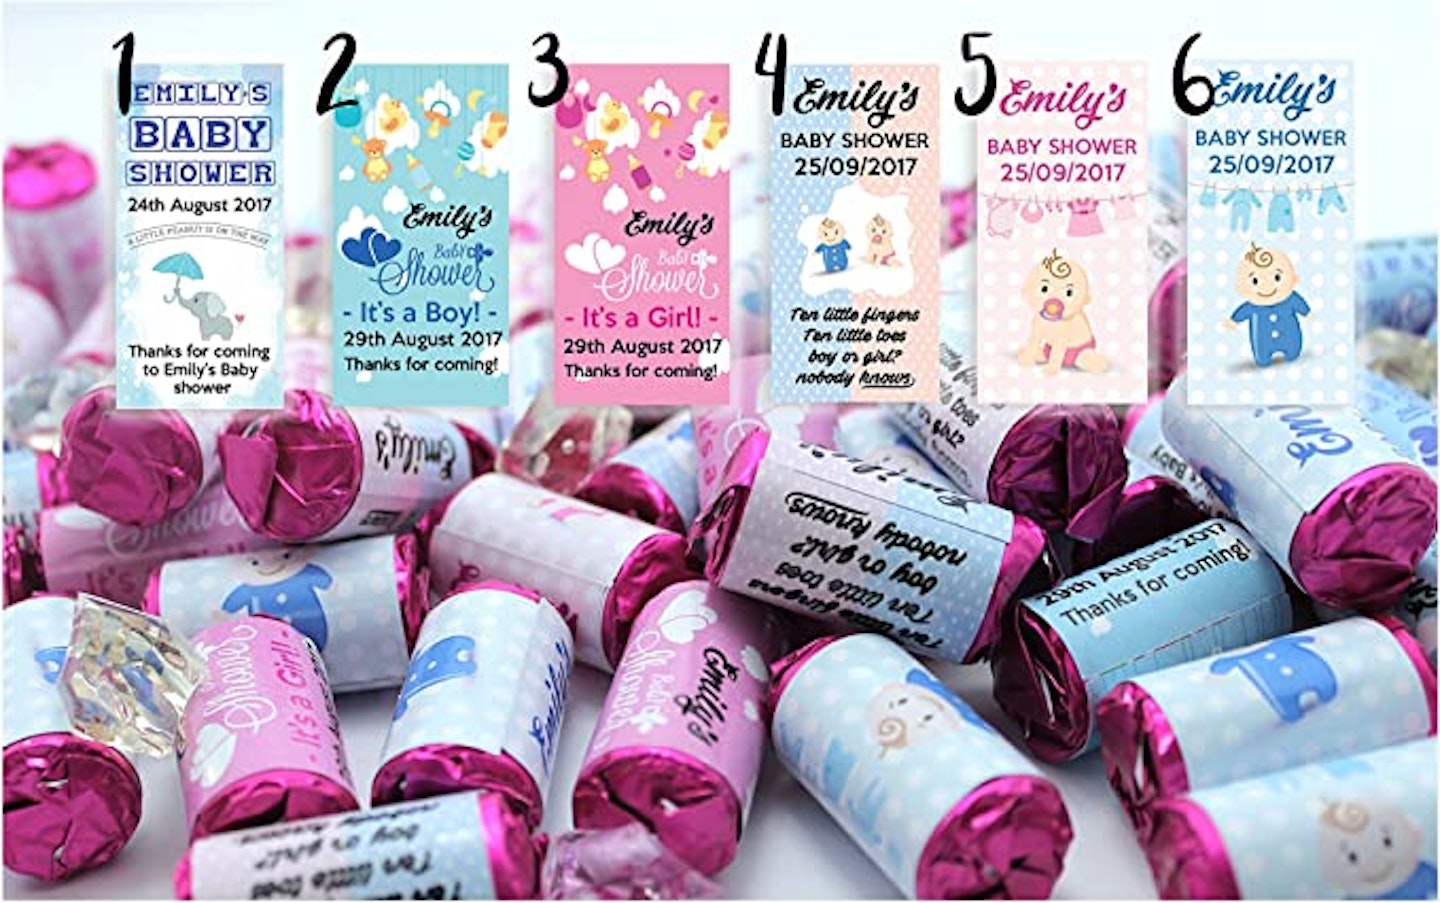 x25 Personalised Baby Shower Sweets Mini Love Hearts Party Favours for Guests